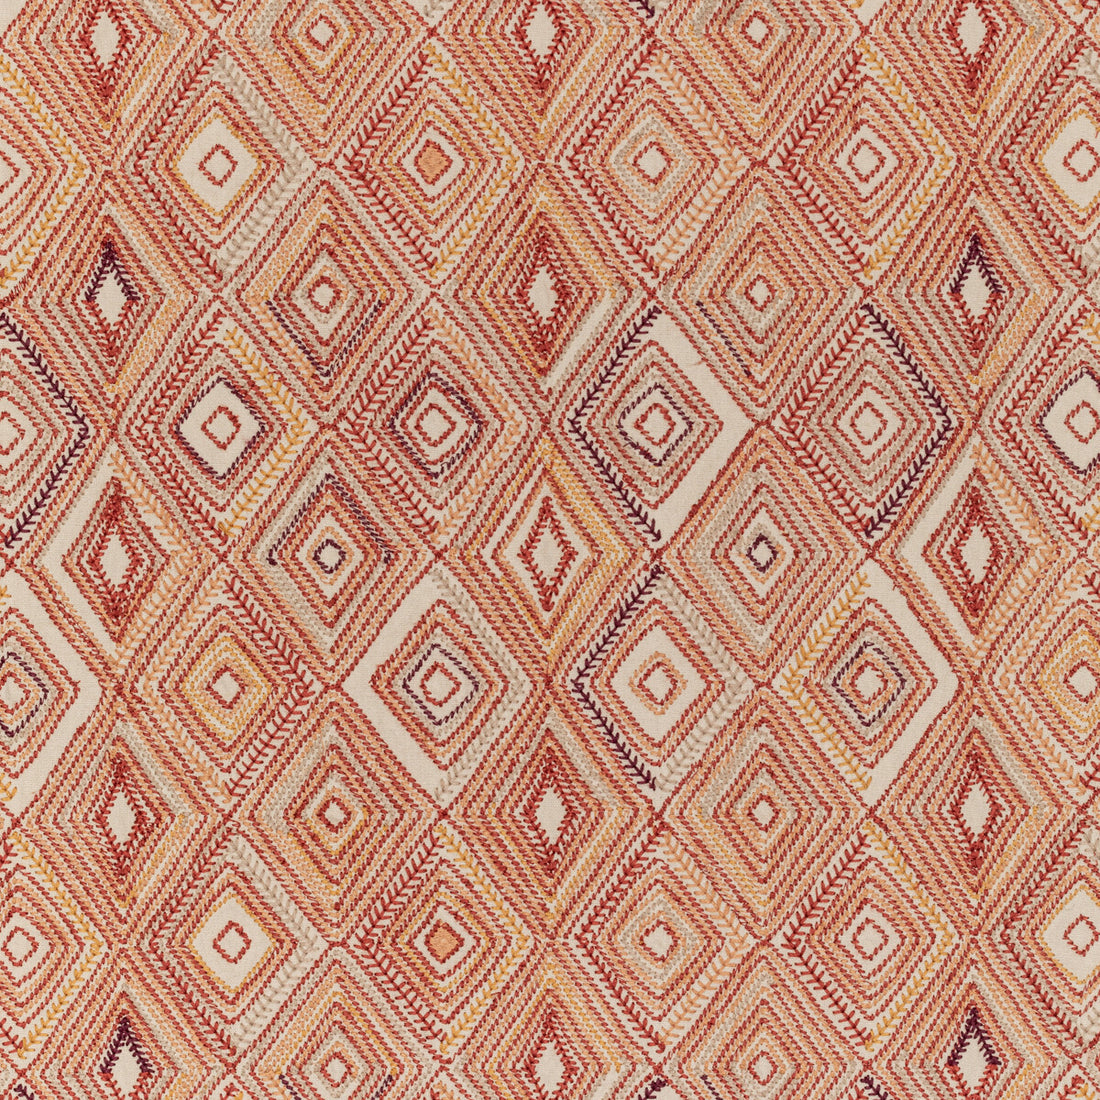 Bowen Embroidery fabric in paprika color - pattern 2020208.24.0 - by Lee Jofa in the Breckenridge collection